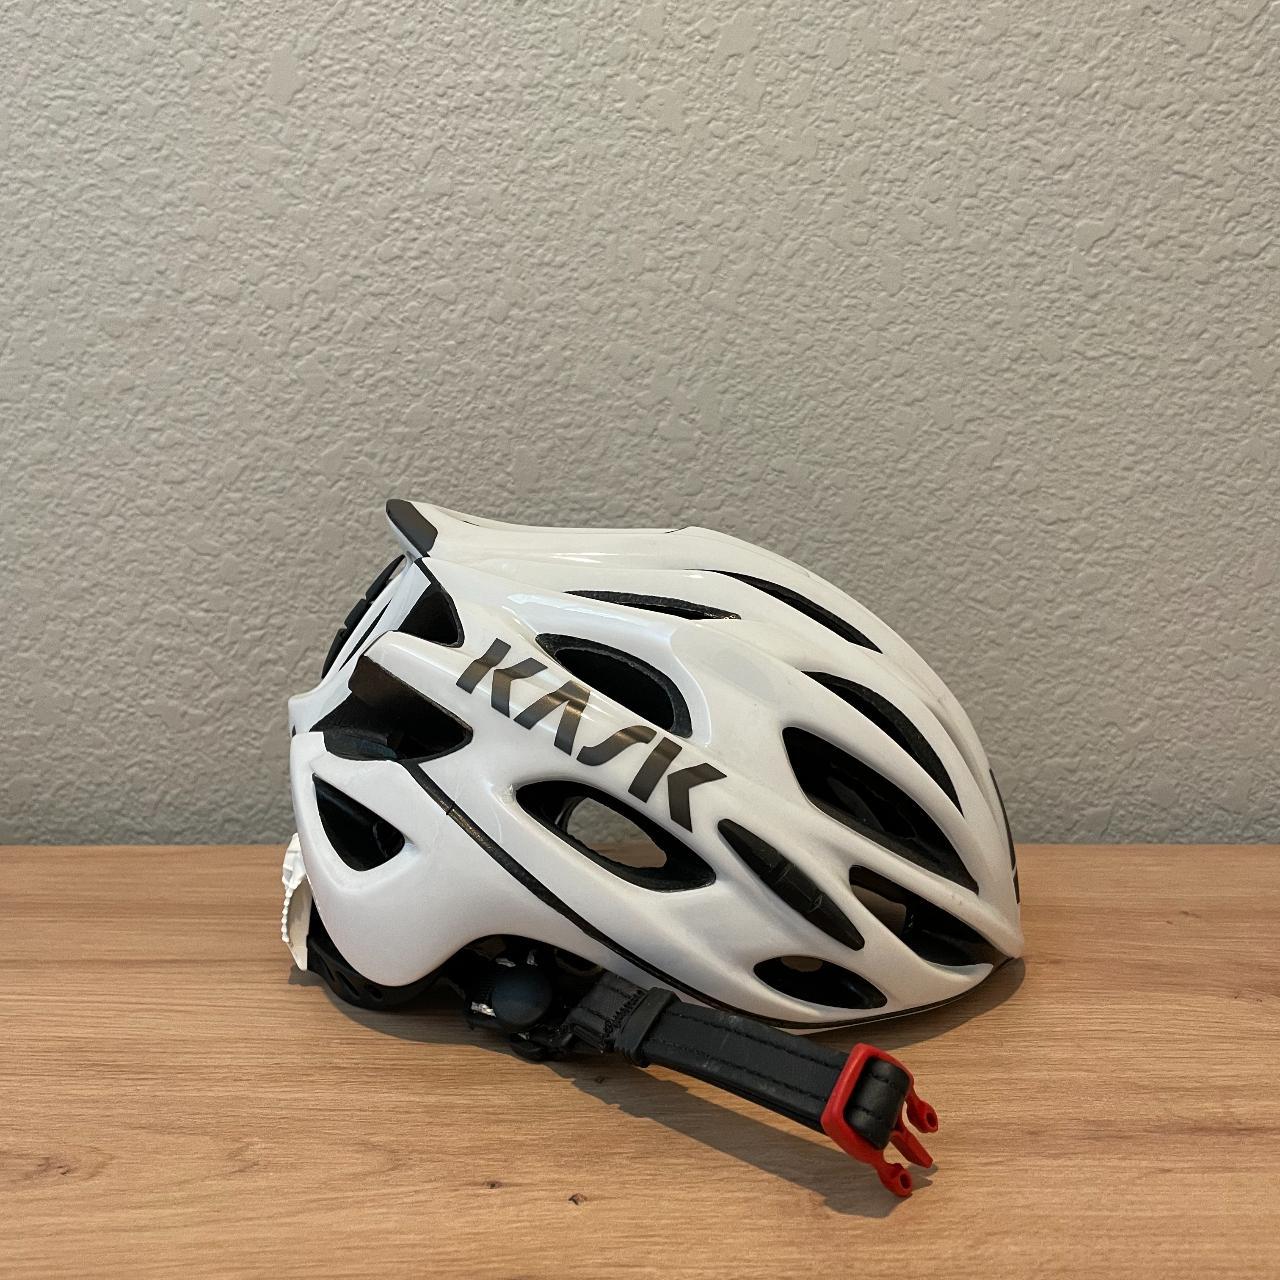 Kask - Mojito X Helmet - Size Small, US only. All